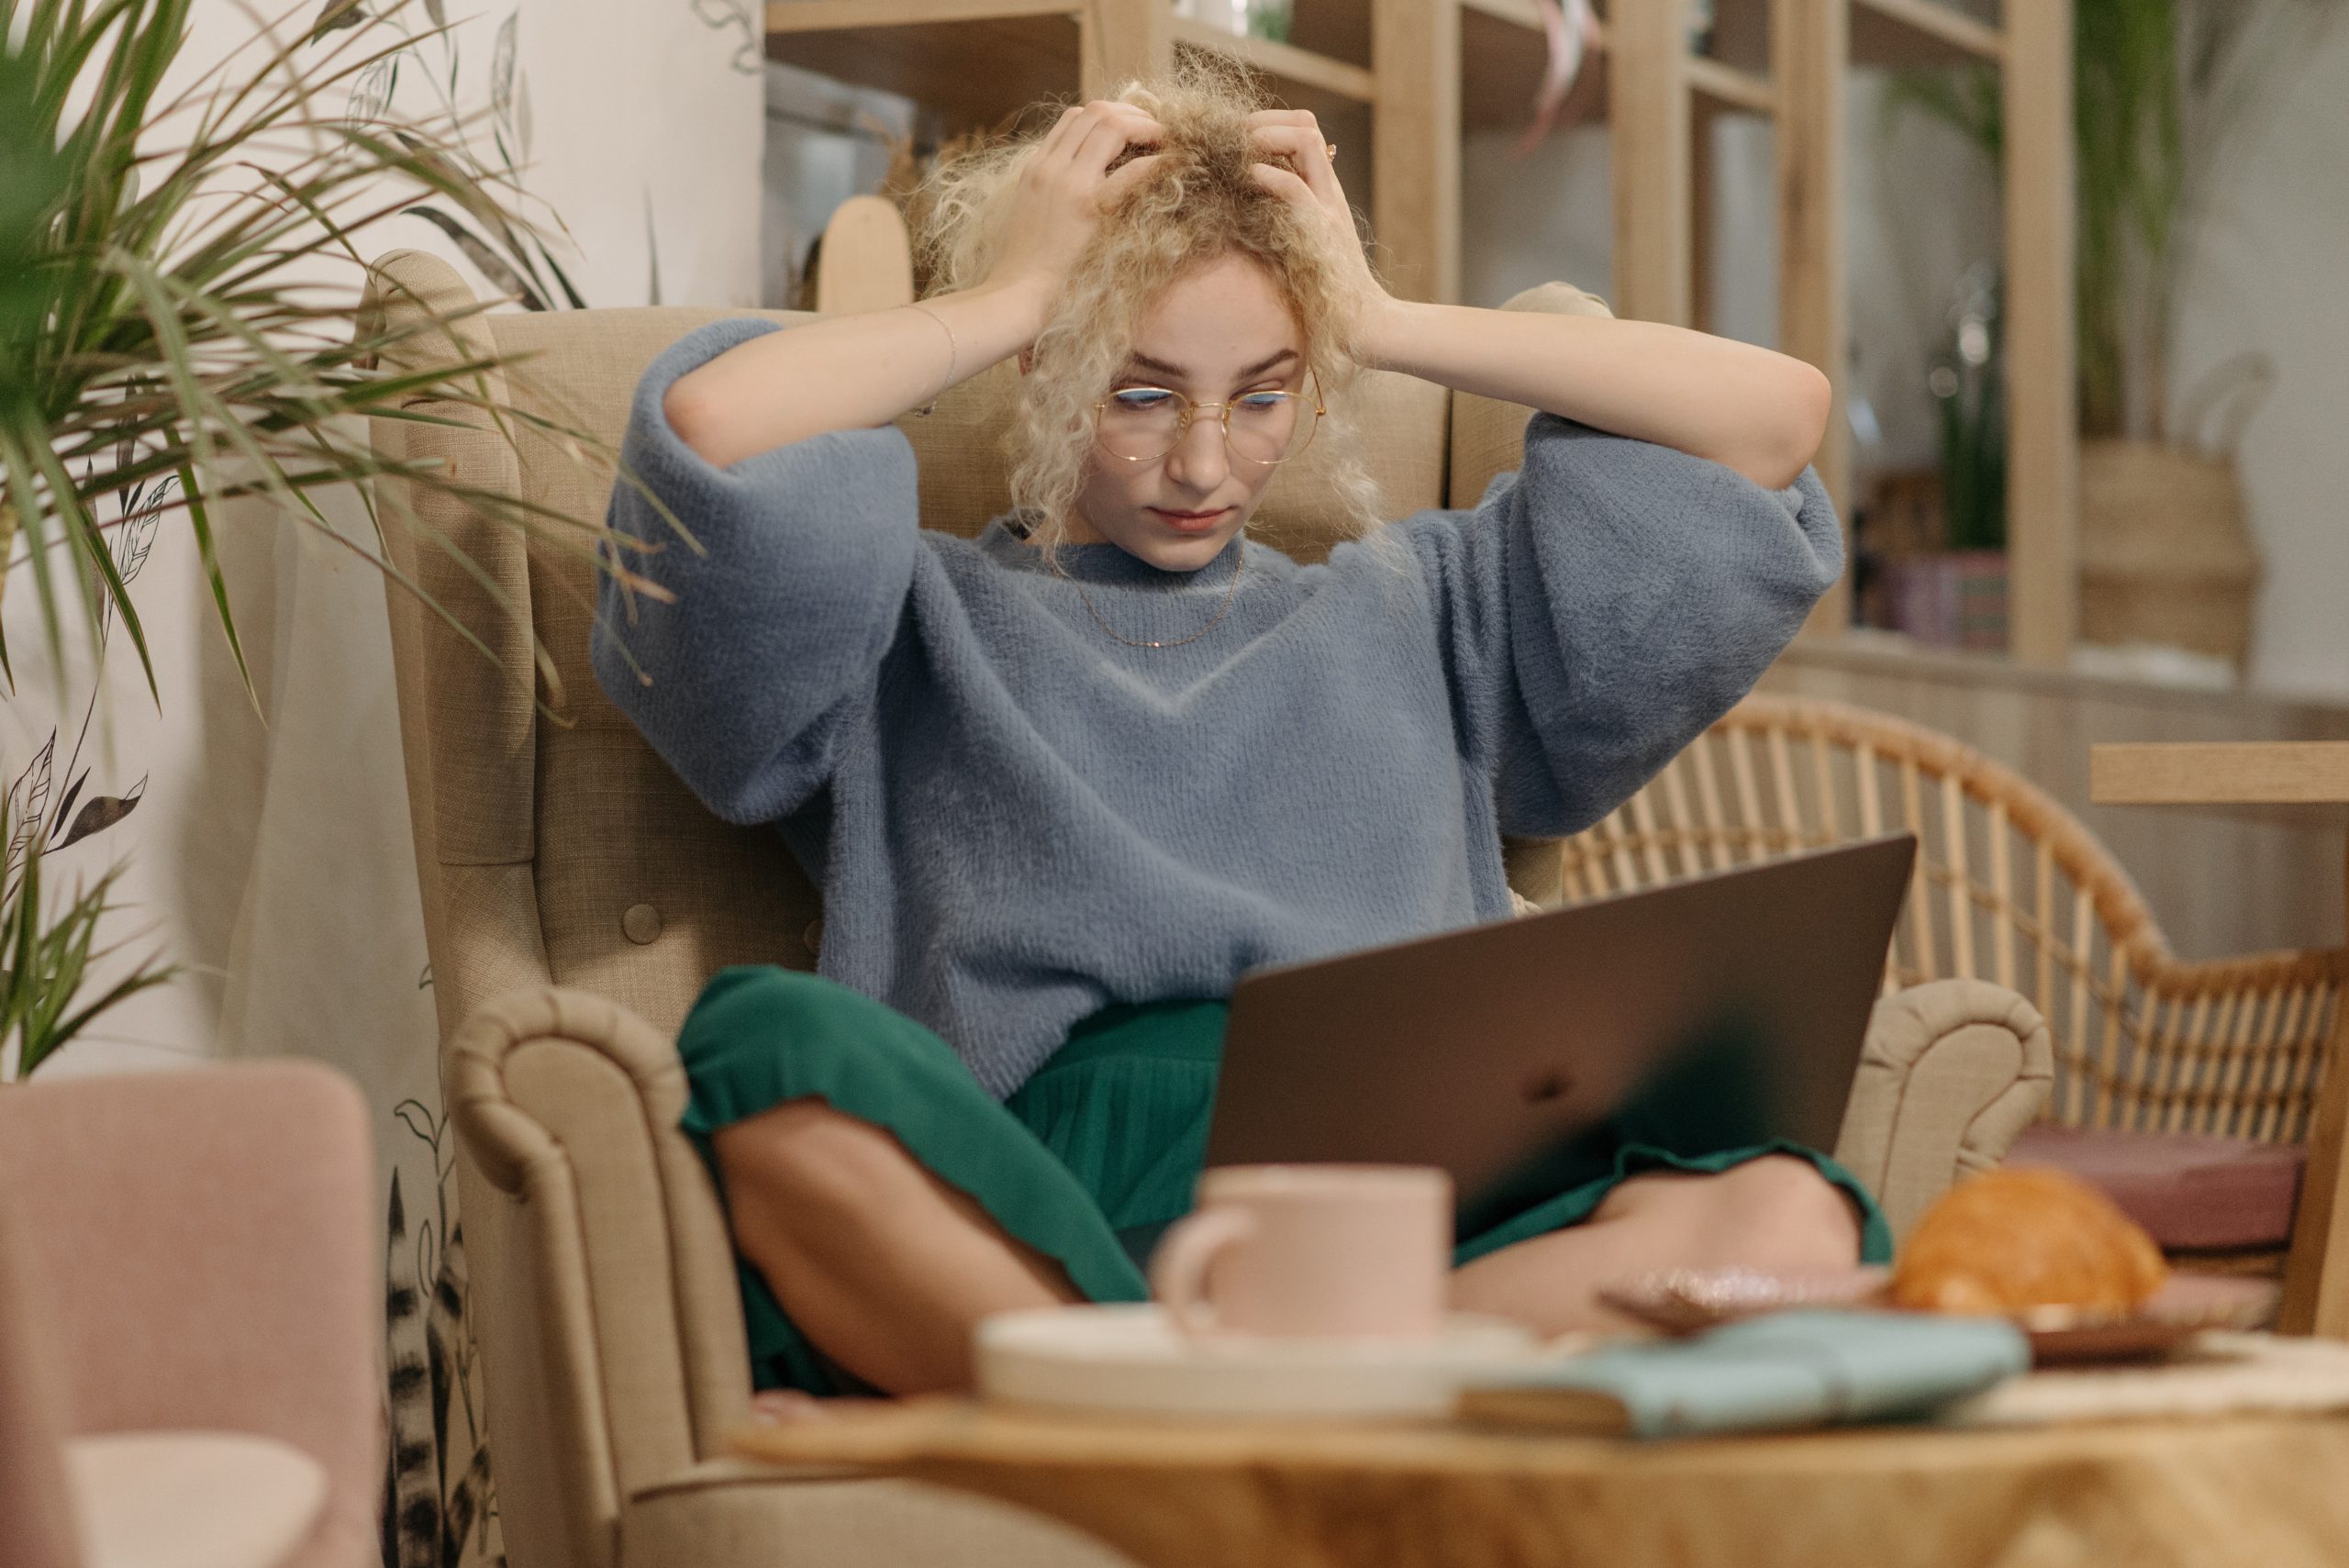 Blonde woman with hands on her head in exasperation, looking at her laptop on a wicker sofa. Distressed.